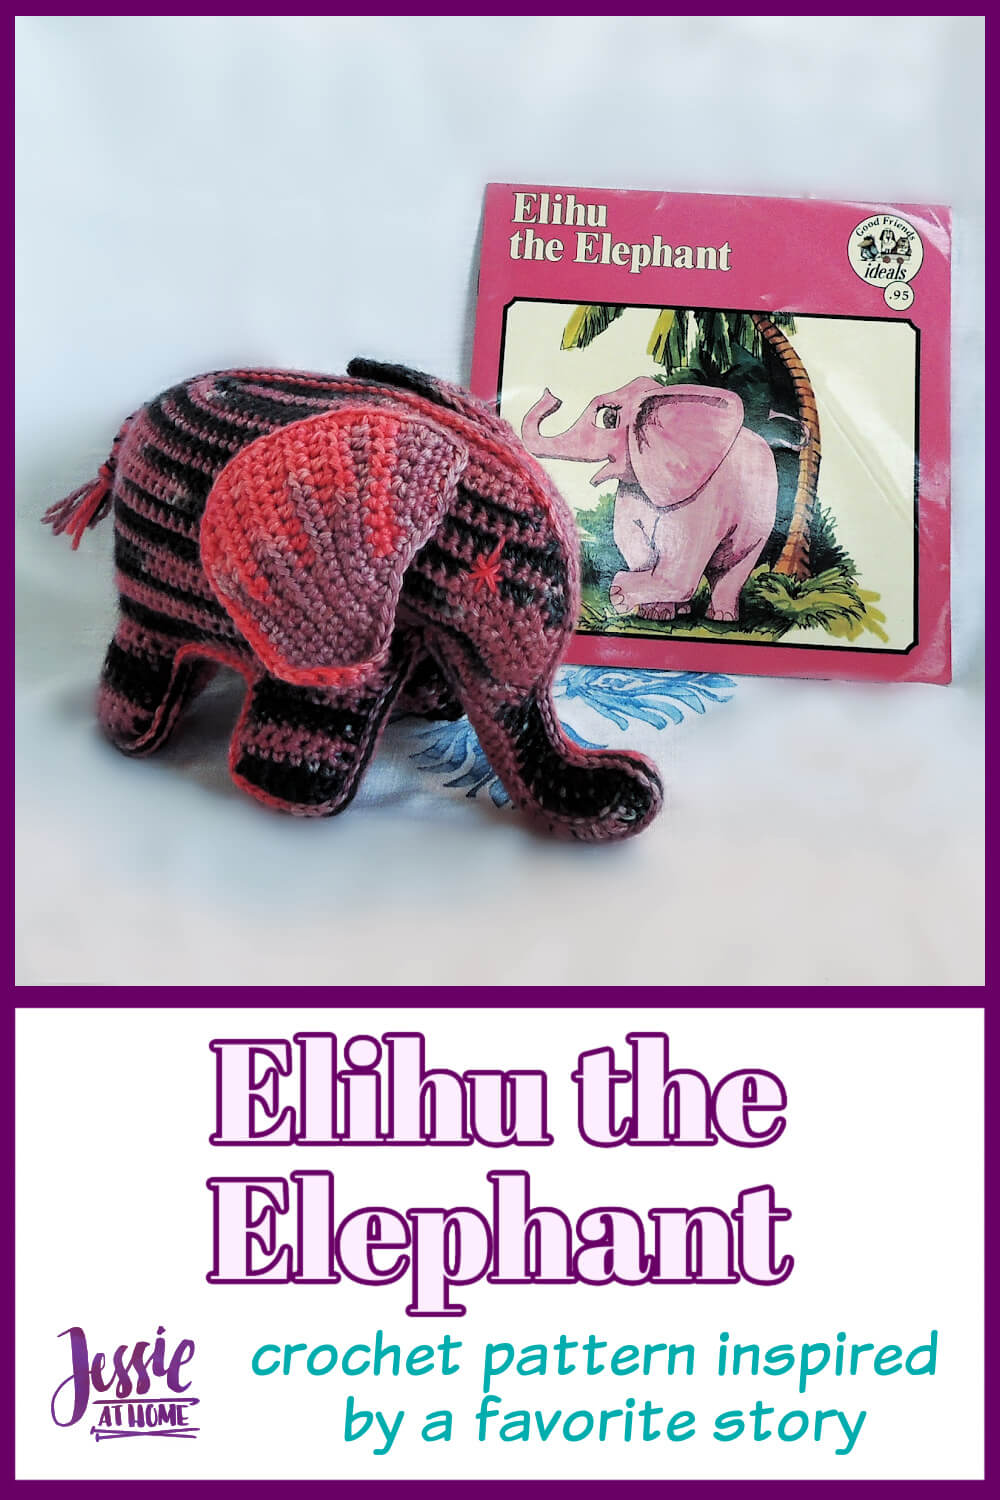 Elihu the Elephant Crochet Pattern - inspired by one of my favorite childhood books